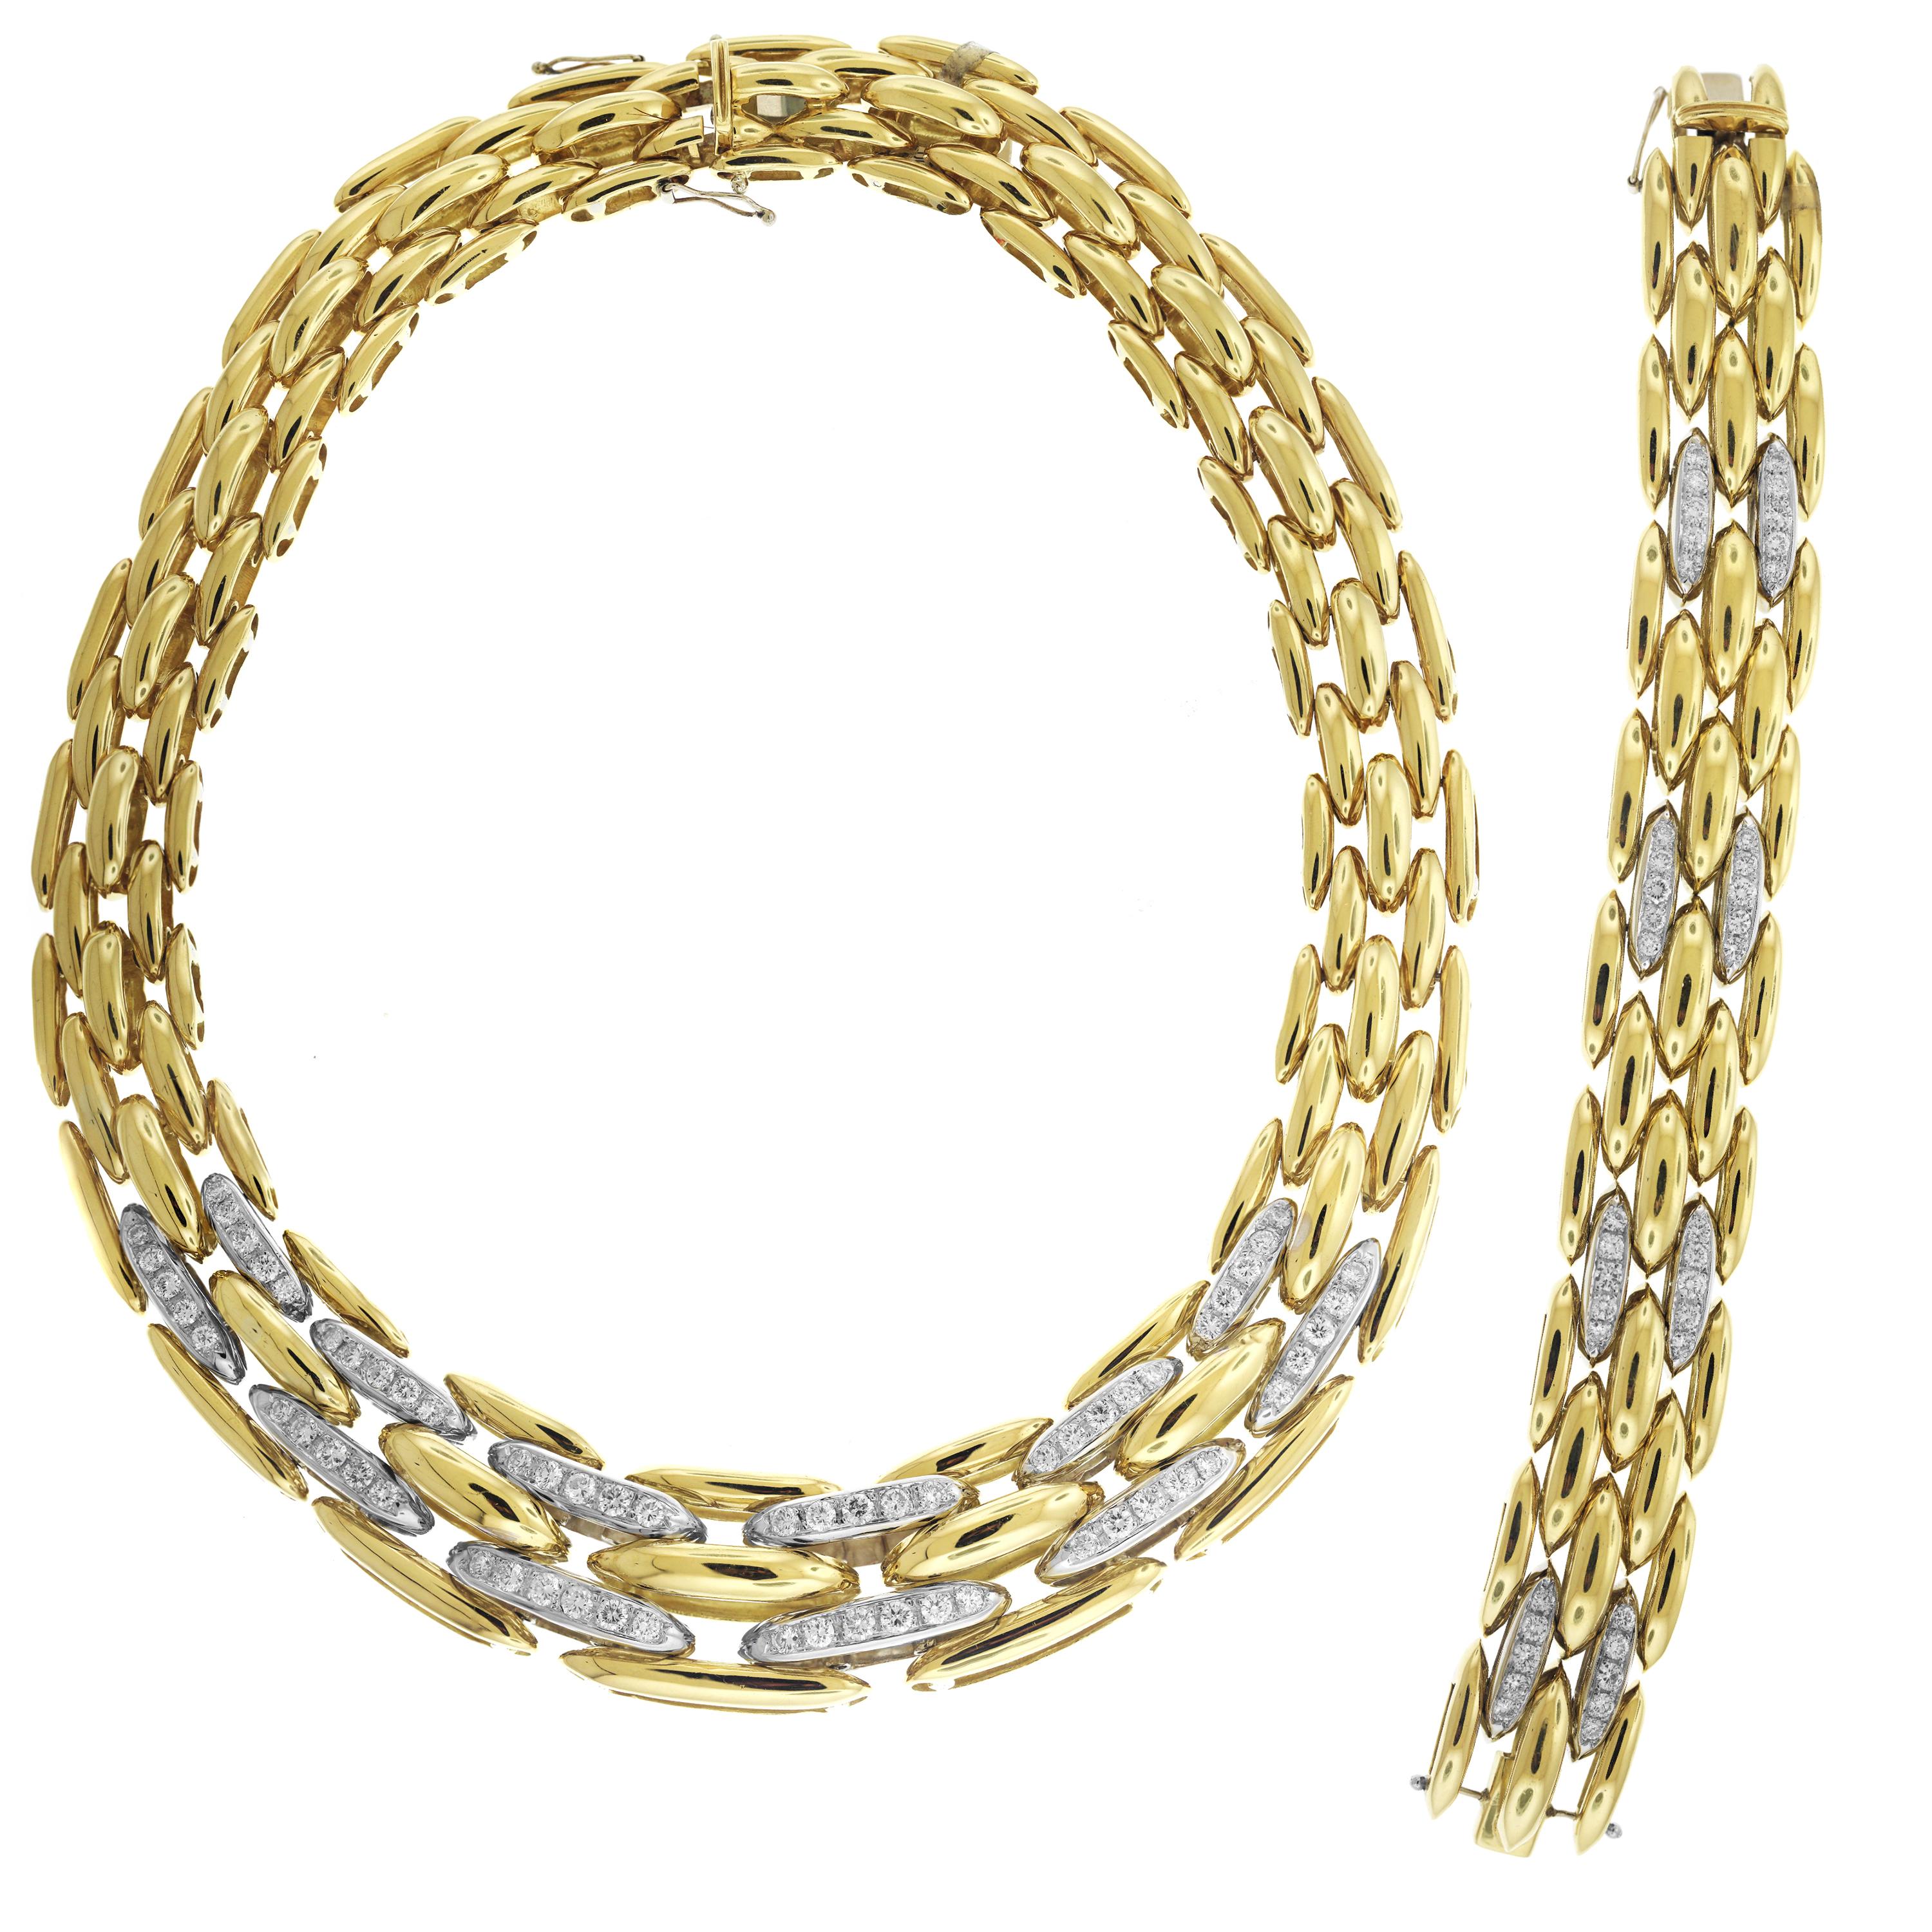 Yellow Gold and Diamond Link Chain Bracelet Necklace Set